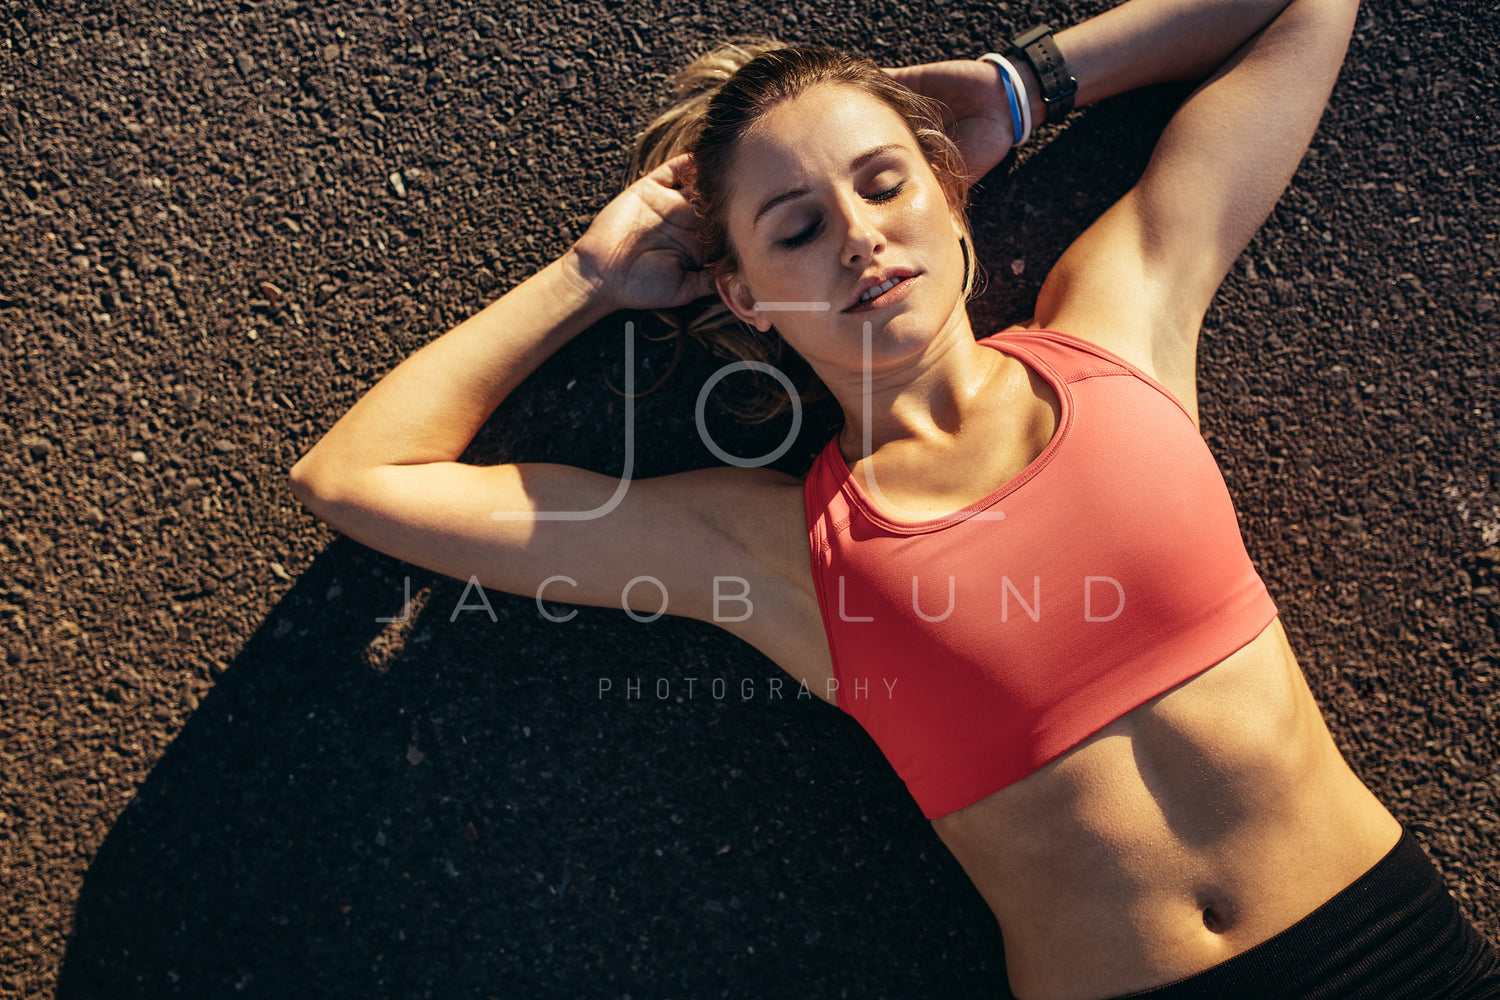 Young Woman in Sports Bra Laying on Bench Stock Photo - Image of